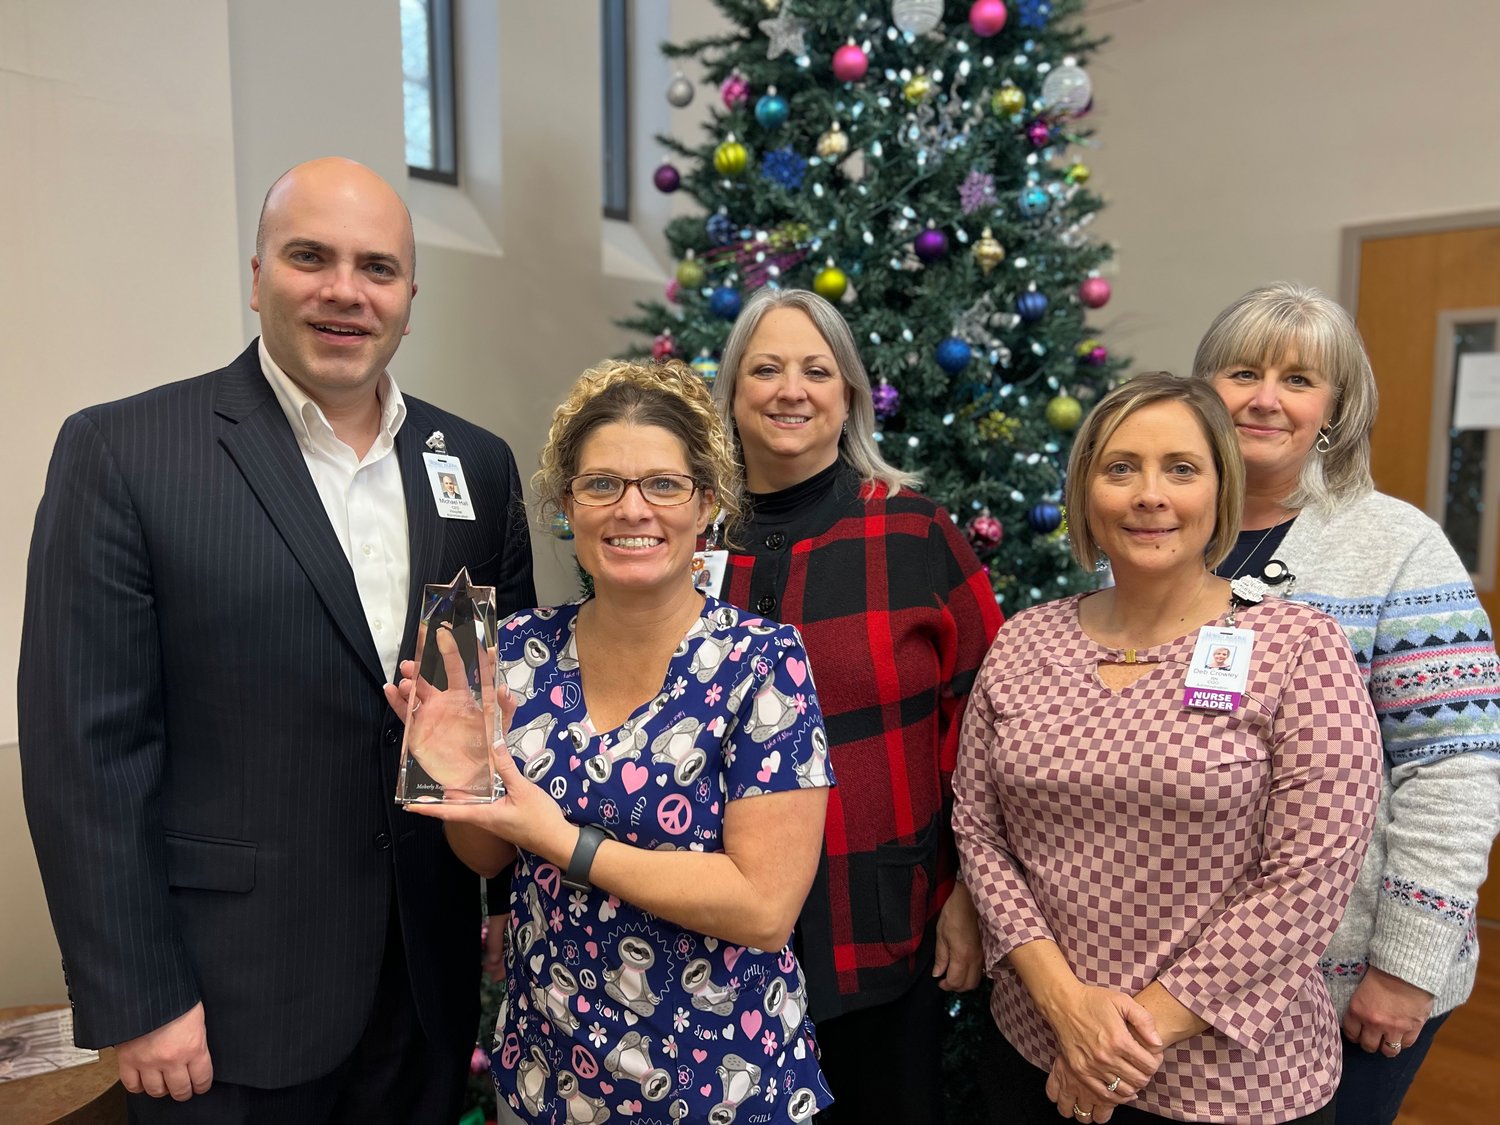 Moberly Regional Medical Center Chief Executive Officer Michael Hall, 2022 Nursing Excellence Award Winner Erica Dollich, Chief Nursing Officer Vicki White, Chief Quality Officer Debbie Crowley and Human Resources Director Karen Crago.